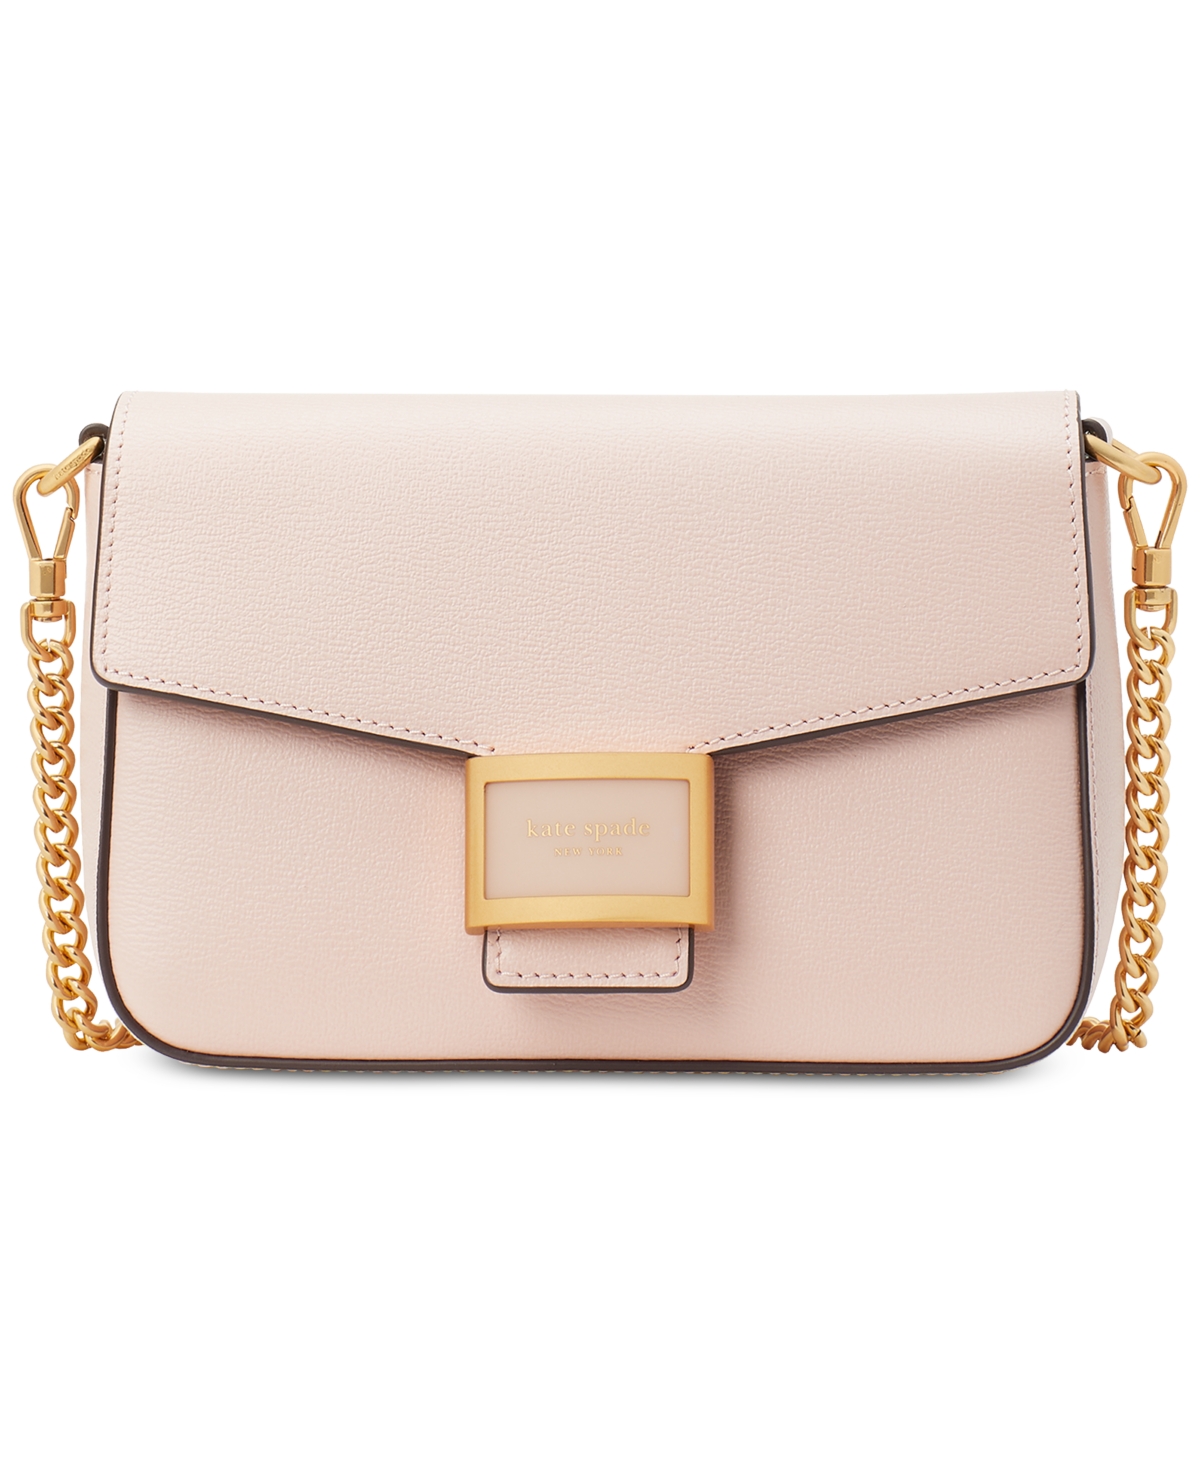 Kate Spade New York Katy Textured Leather Flap Chain Crossbody In Mochi ...